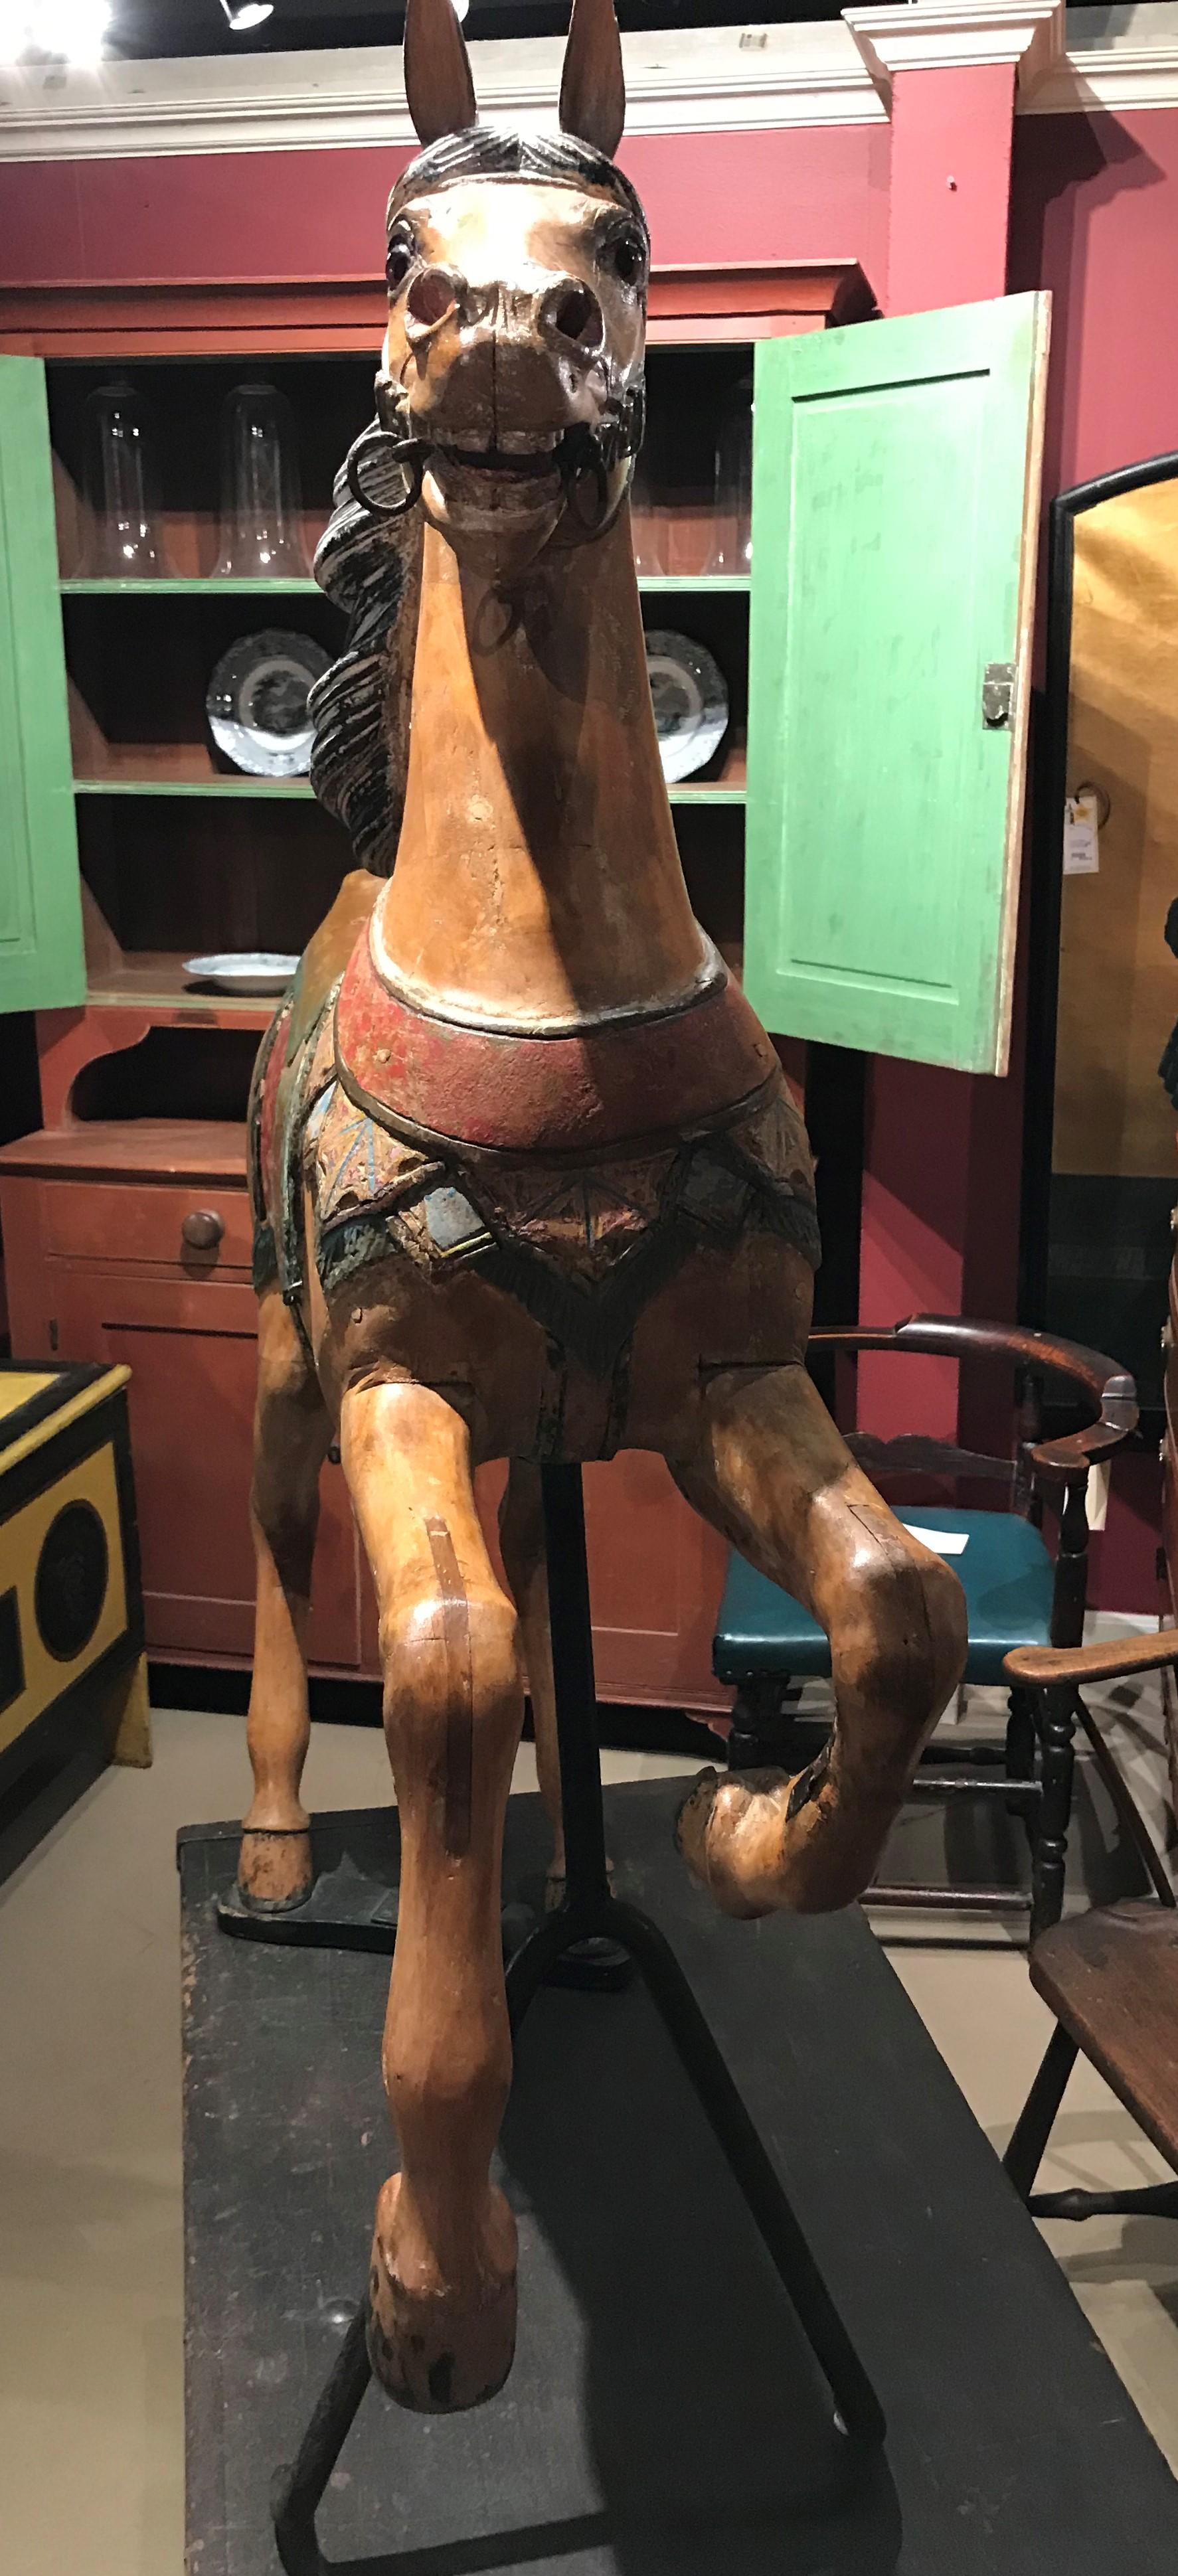 A fine carved and polychrome wood prancing carousel horse with saddle and horse-hair tail. Removable iron fork stand. Rear legs attached to a single plank. Good overall condition, with some paint loss, one front leg with repair, other small